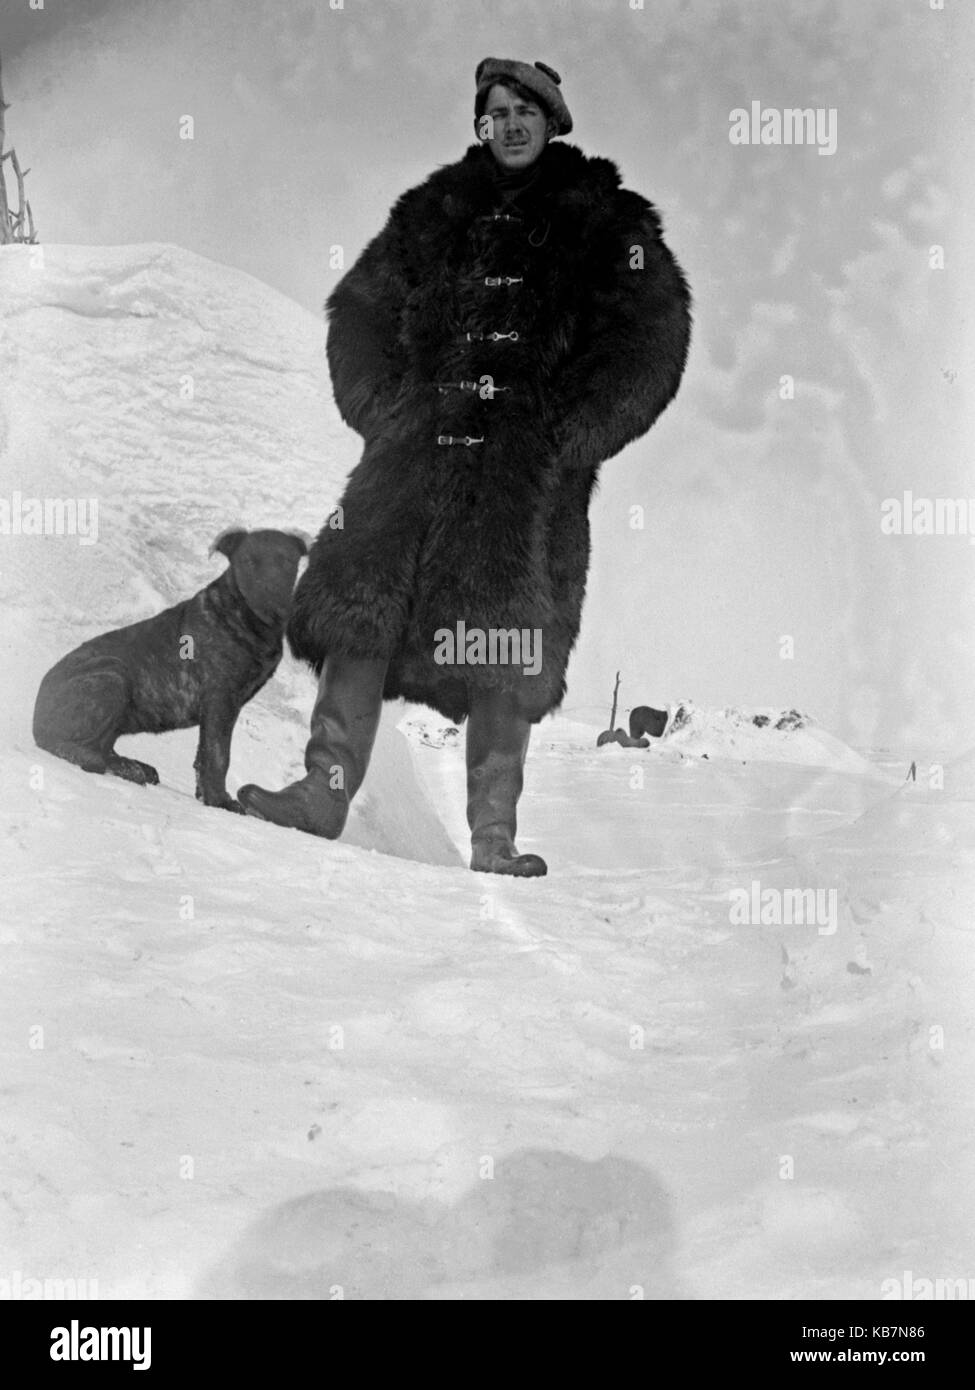 AJAXNETPHOTO. 1903. CANADA, EXACT LOCATION UNKNOWN. - MAN IN HEAVY FUR COAT AND CAP WITH DOG IN THE SNOW. PHOTOGRAPHER:UNKNOWN © DIGITAL IMAGE COPYRIGHT AJAX VINTAGE PICTURE LIBRARY SOURCE: AJAX VINTAGE PICTURE LIBRARY COLLECTION REF:AVL 1873 Stock Photo